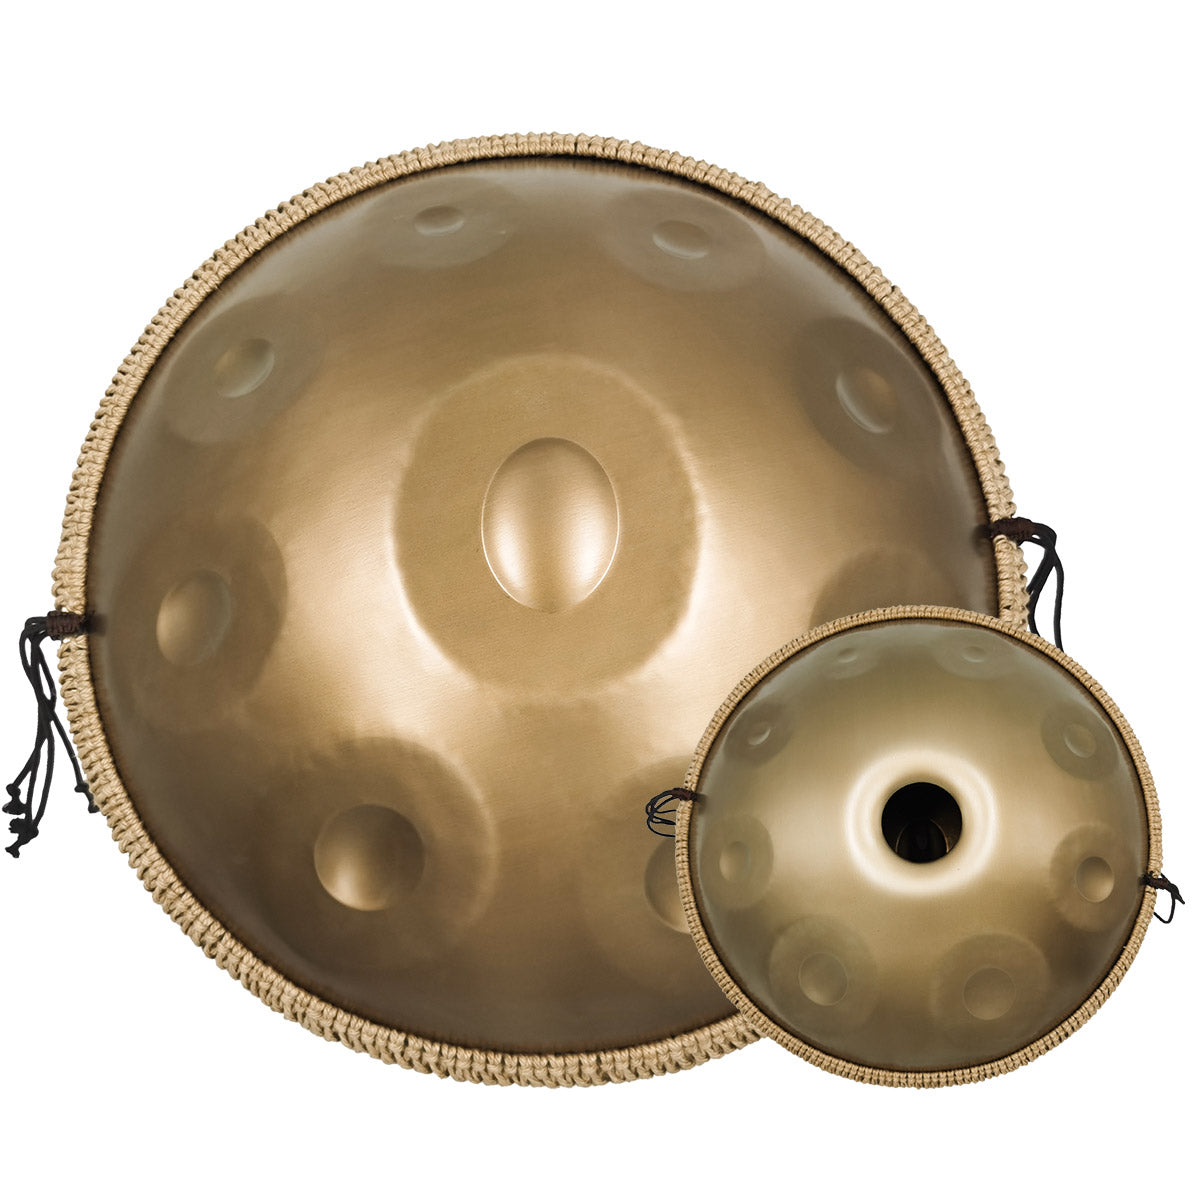 432 Hz Handpan Steel Drum - 22 Inch  Performer In D Minor With Stand,  Case, Mallets, And Cloth, 9-Note Harmonic Percussion In D Minor (Color 